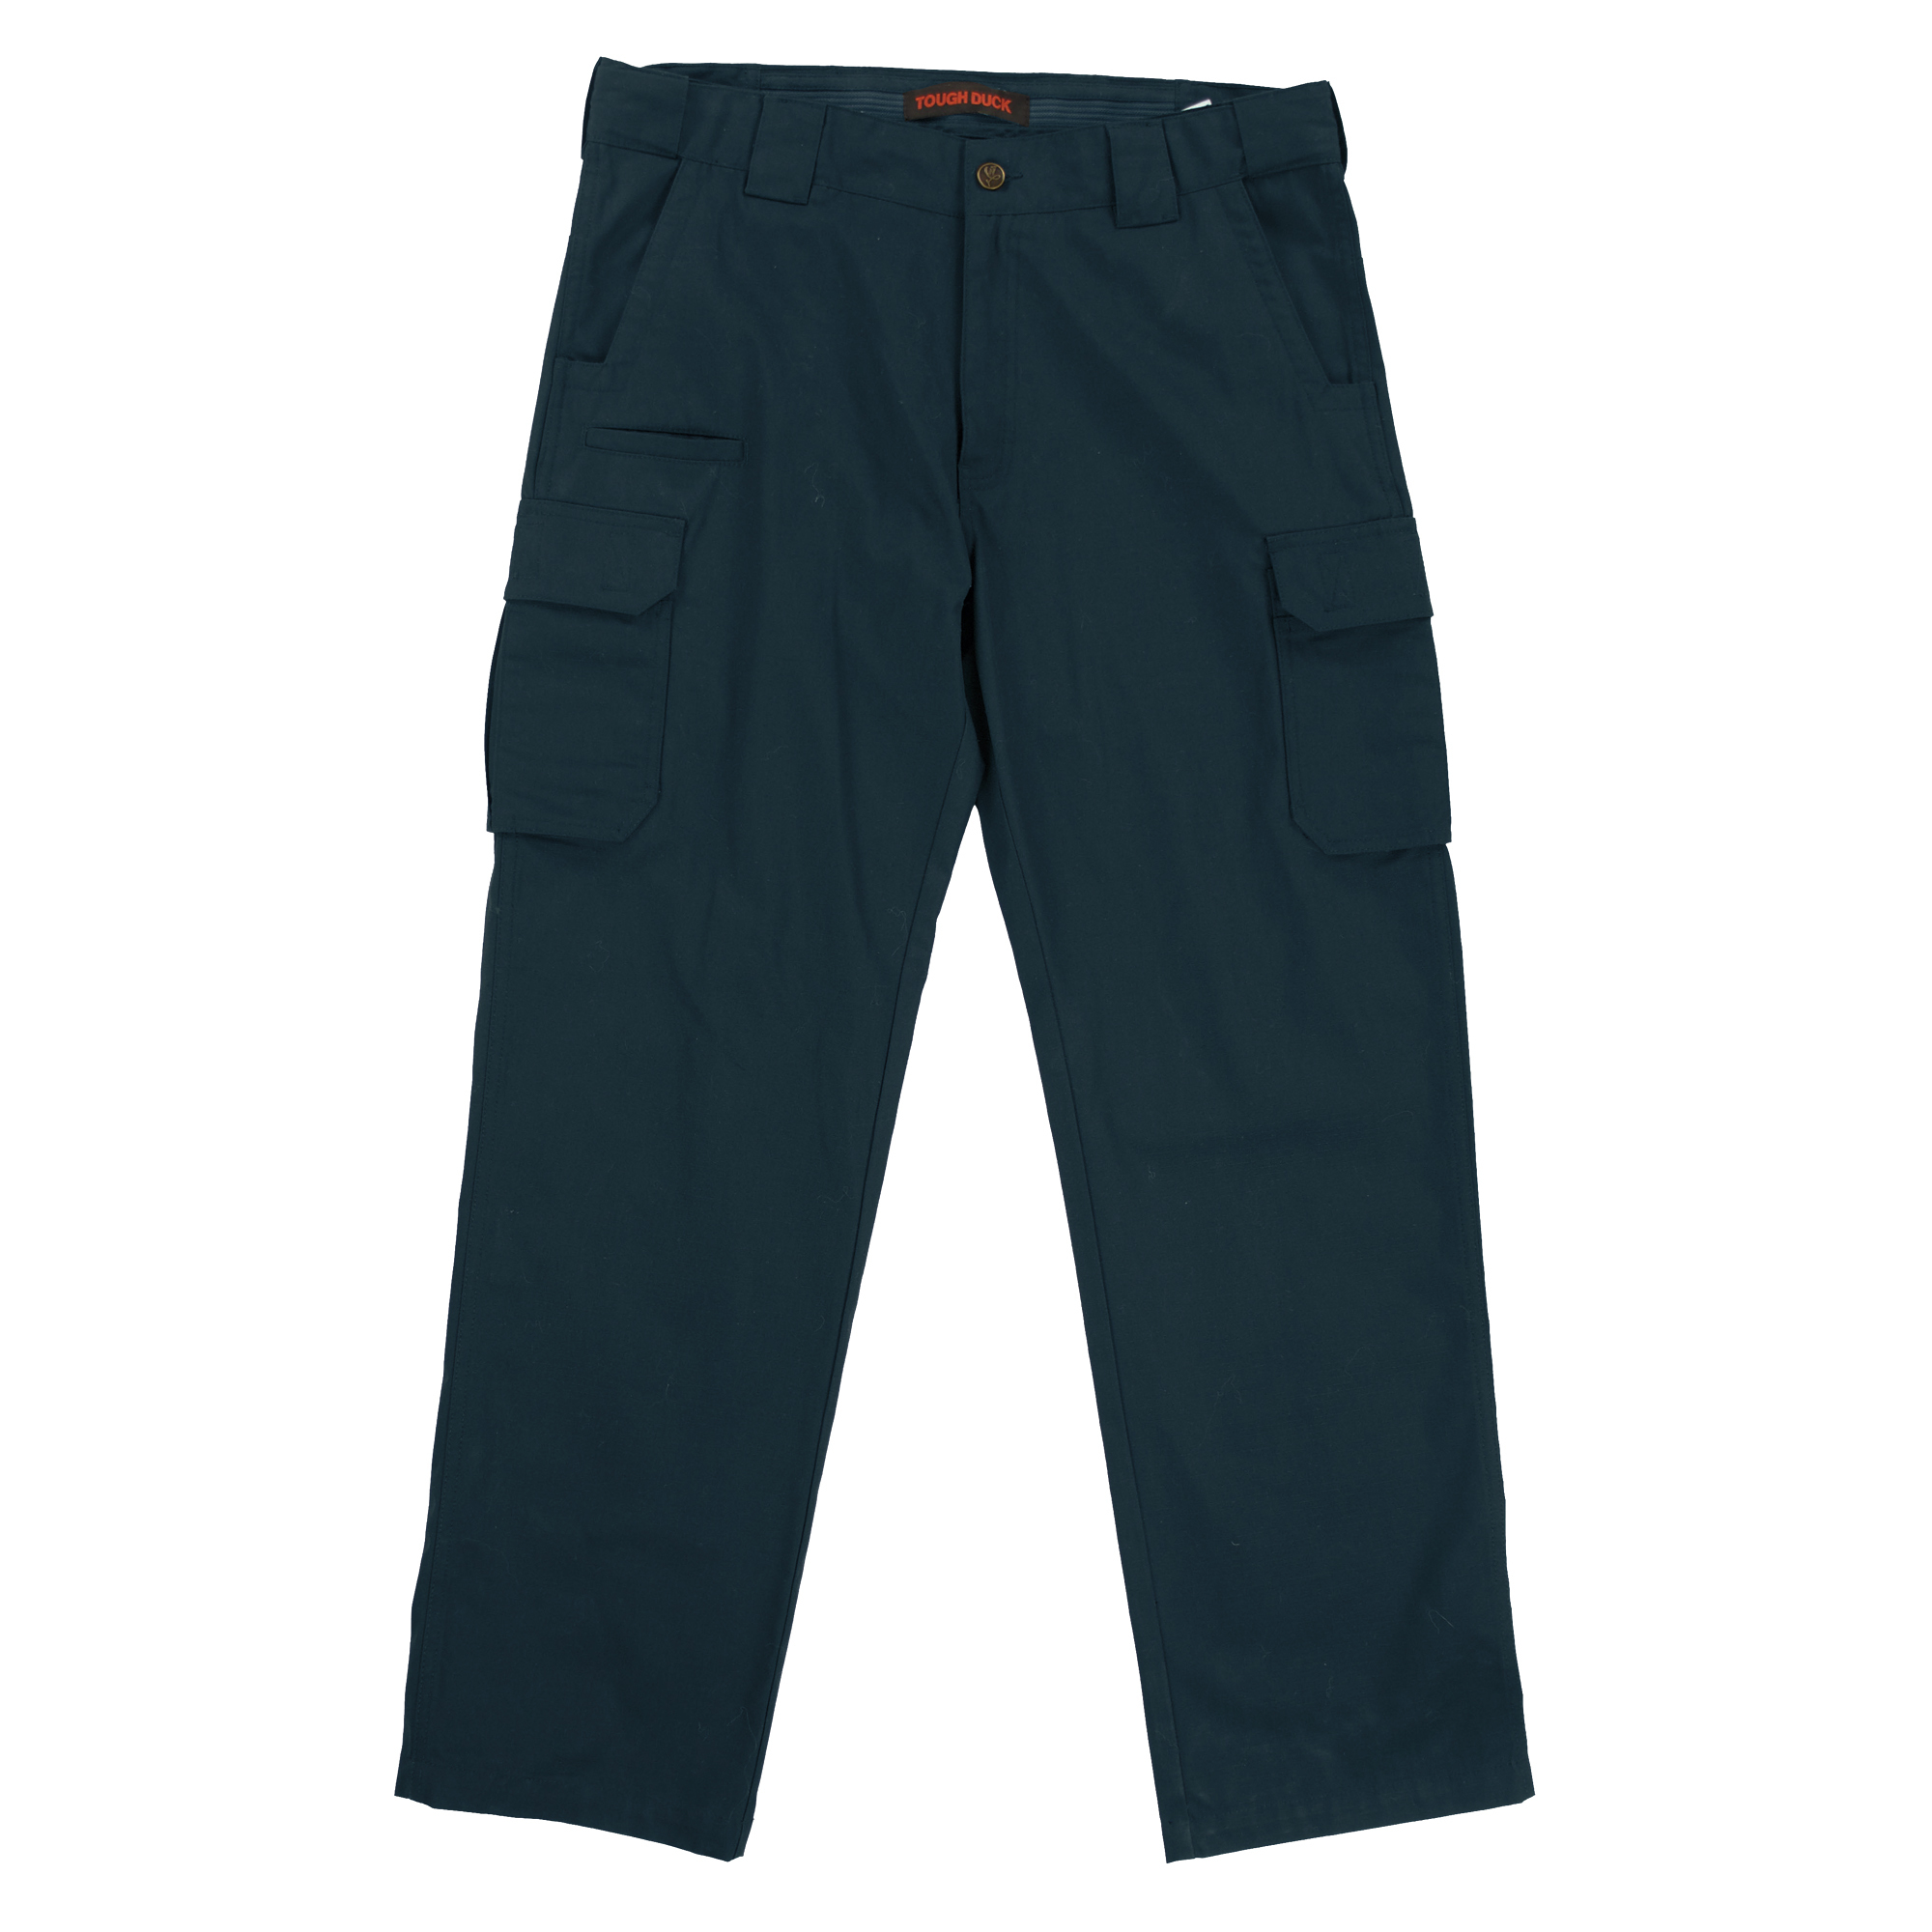 Tough Duck, Ripstop Cargo Pant, Waist 48 in, Inseam 32 in, Color Navy, Model WP111